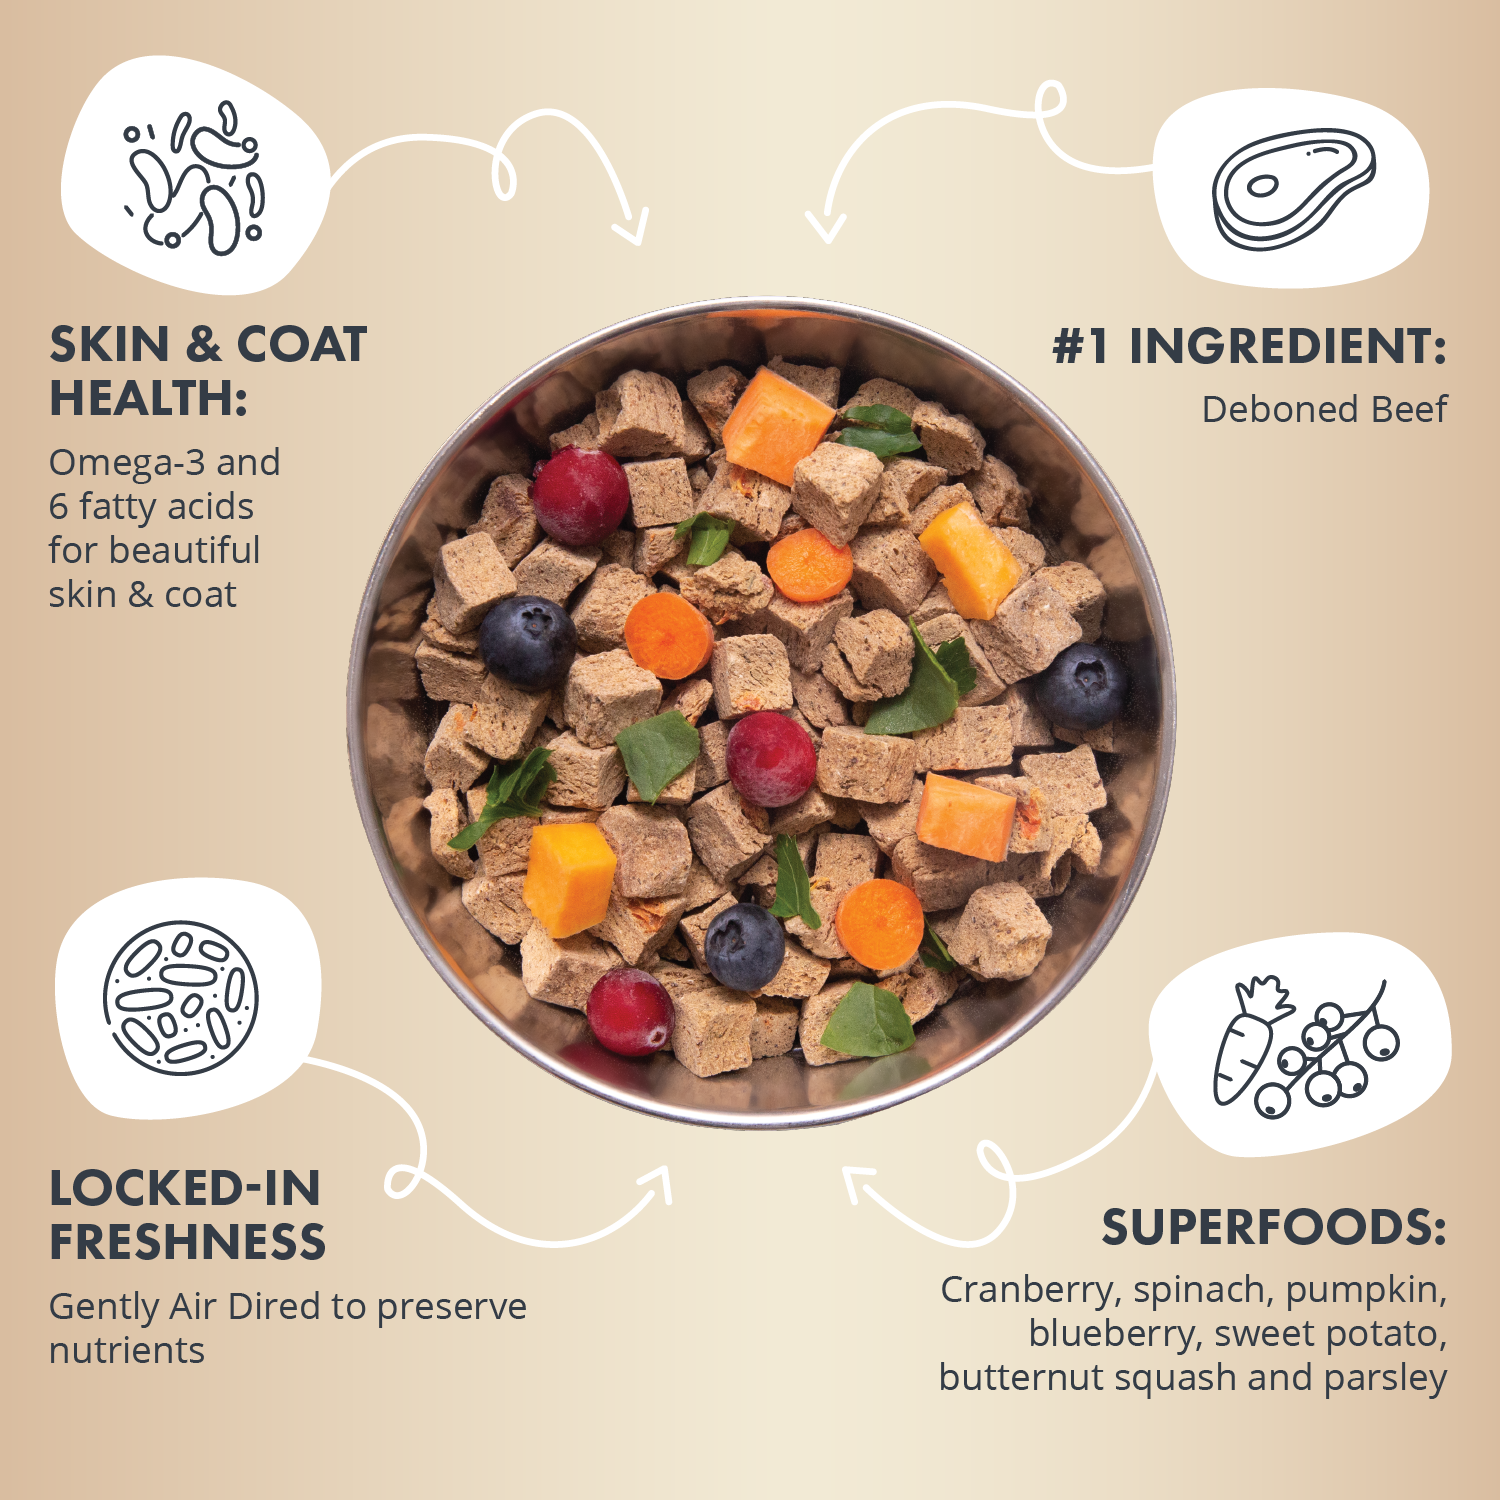 Bowl of Health Extension air-dried dog food with beef as the #1 ingredient, enriched with superfoods like cranberry and spinach, and omega fatty acids for skin and coat health, highlighting the locked-in freshness and nutrient preservation.